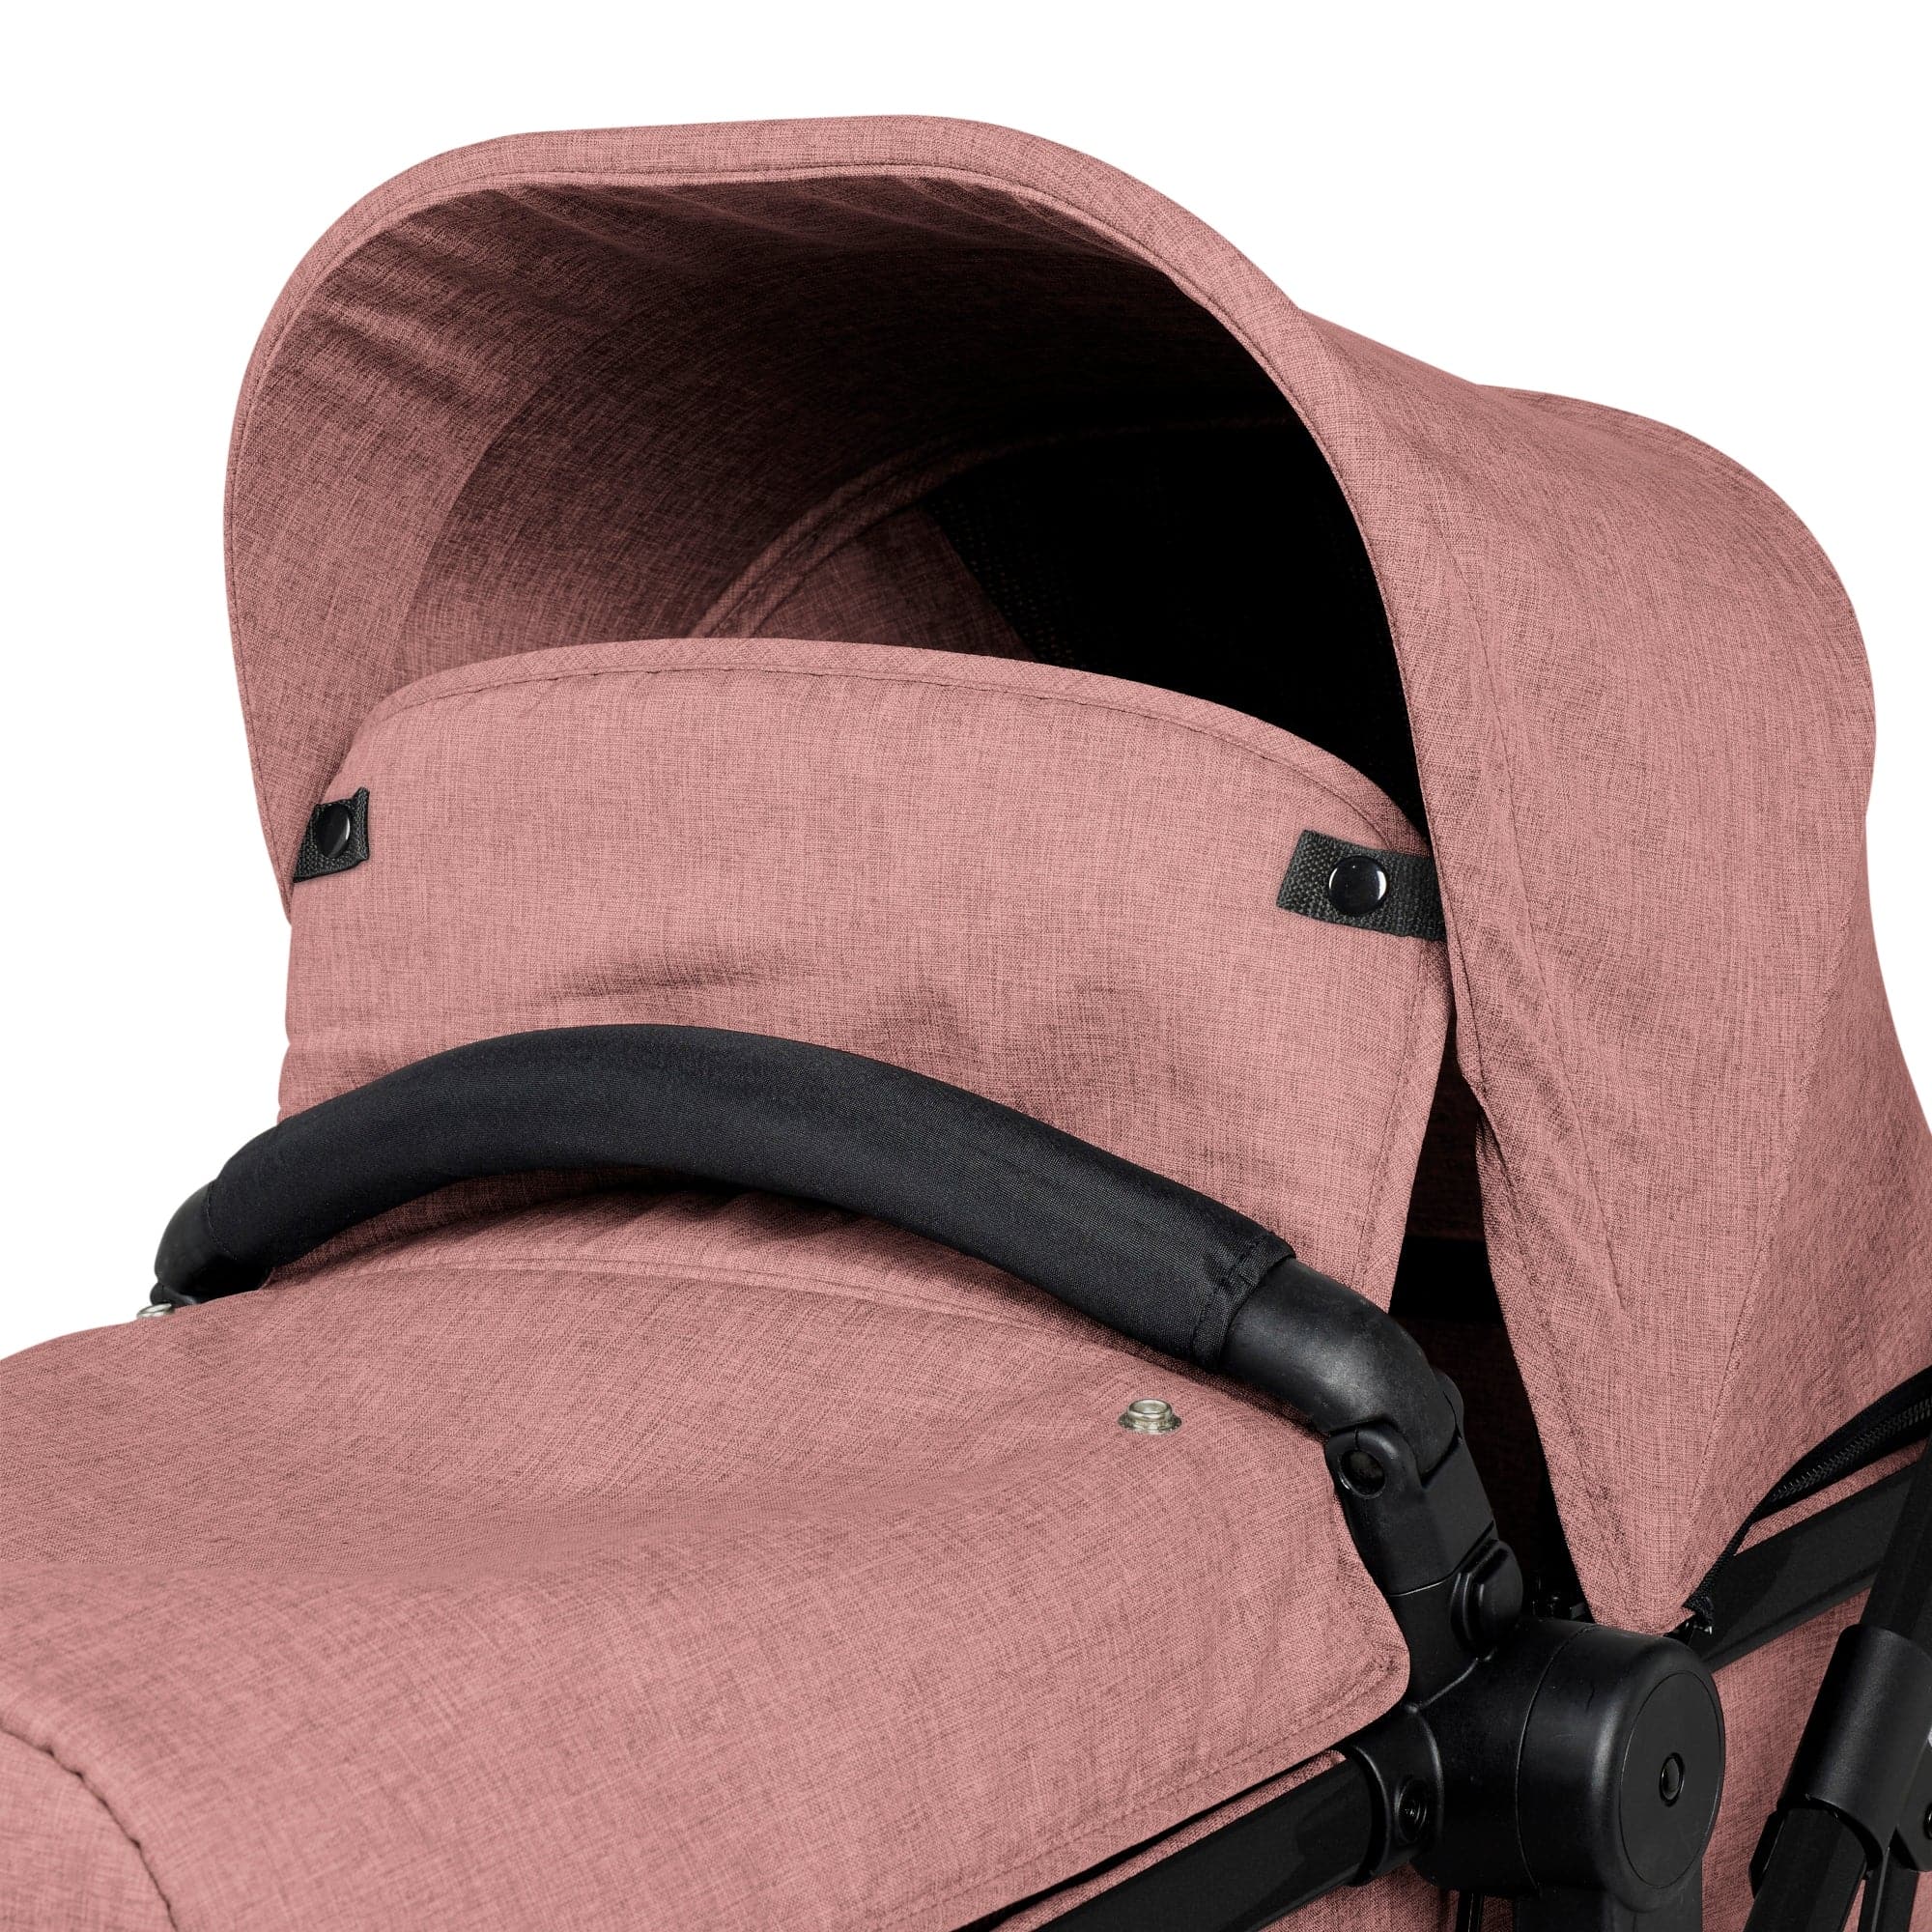 Ickle Bubba Comet 3-In-1 Travel System With Astral Car Seat - Dusky Pink - For Your Little One